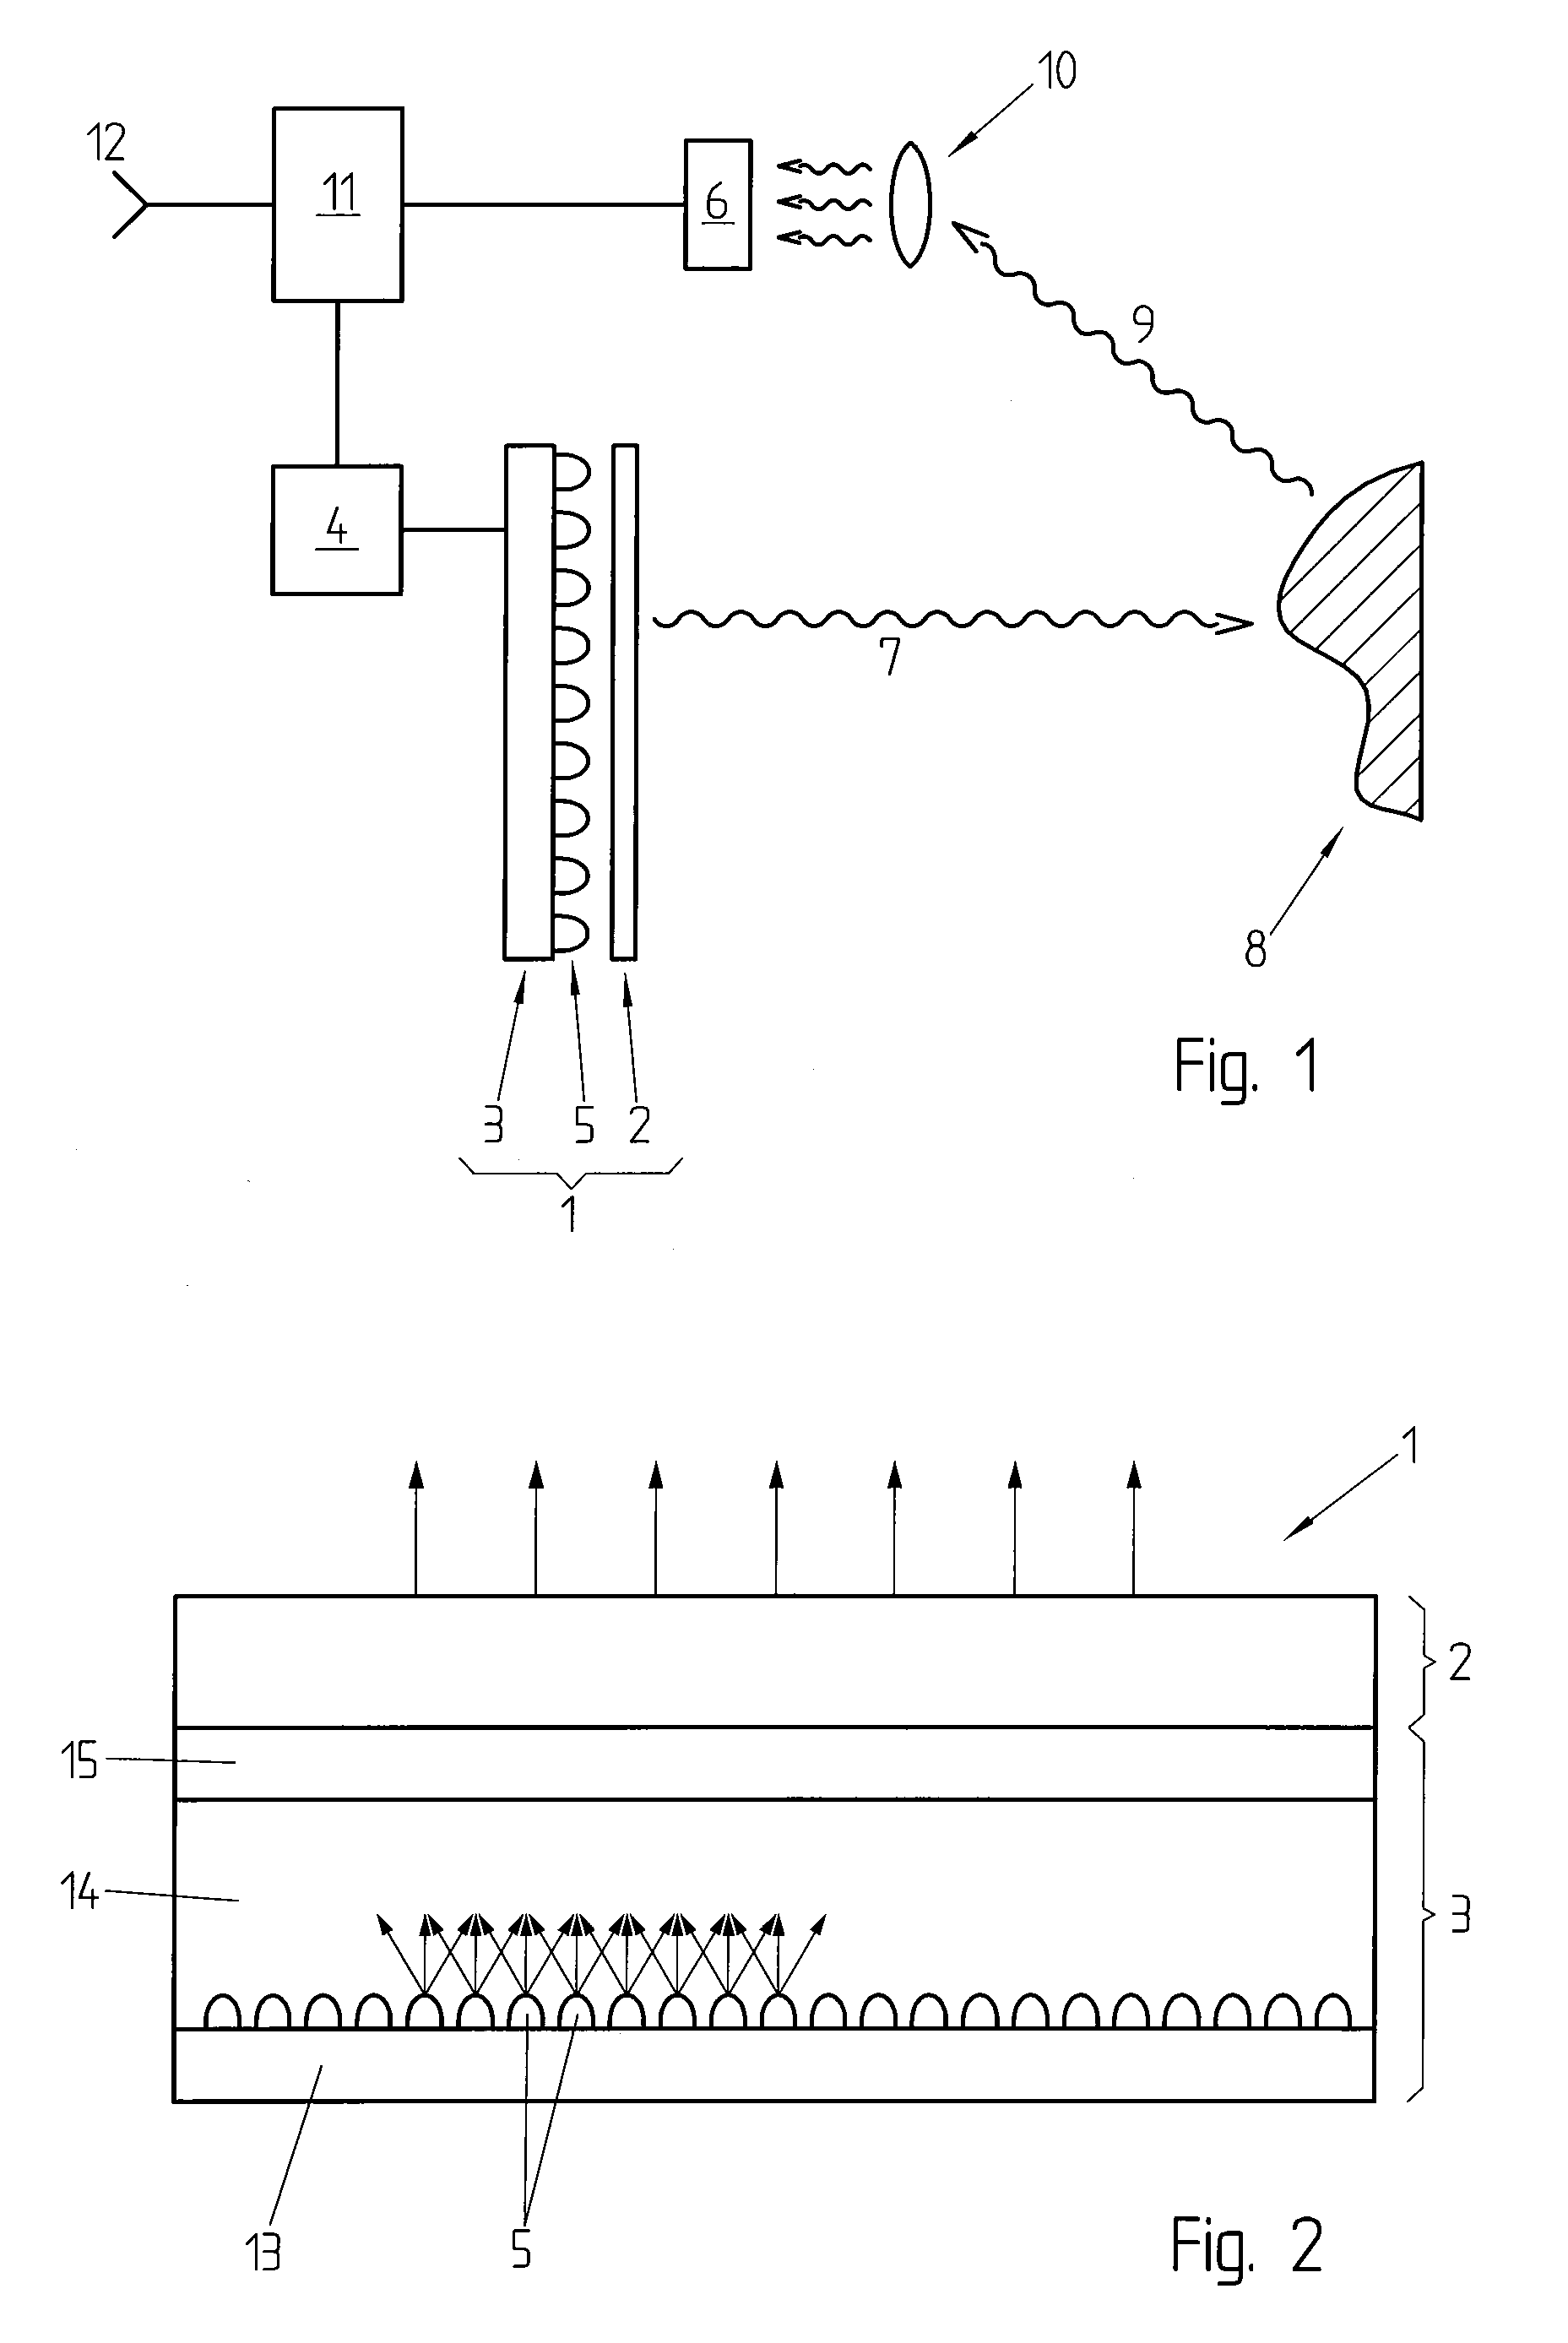 Time-of-flight based imaging system using a display as illumination source